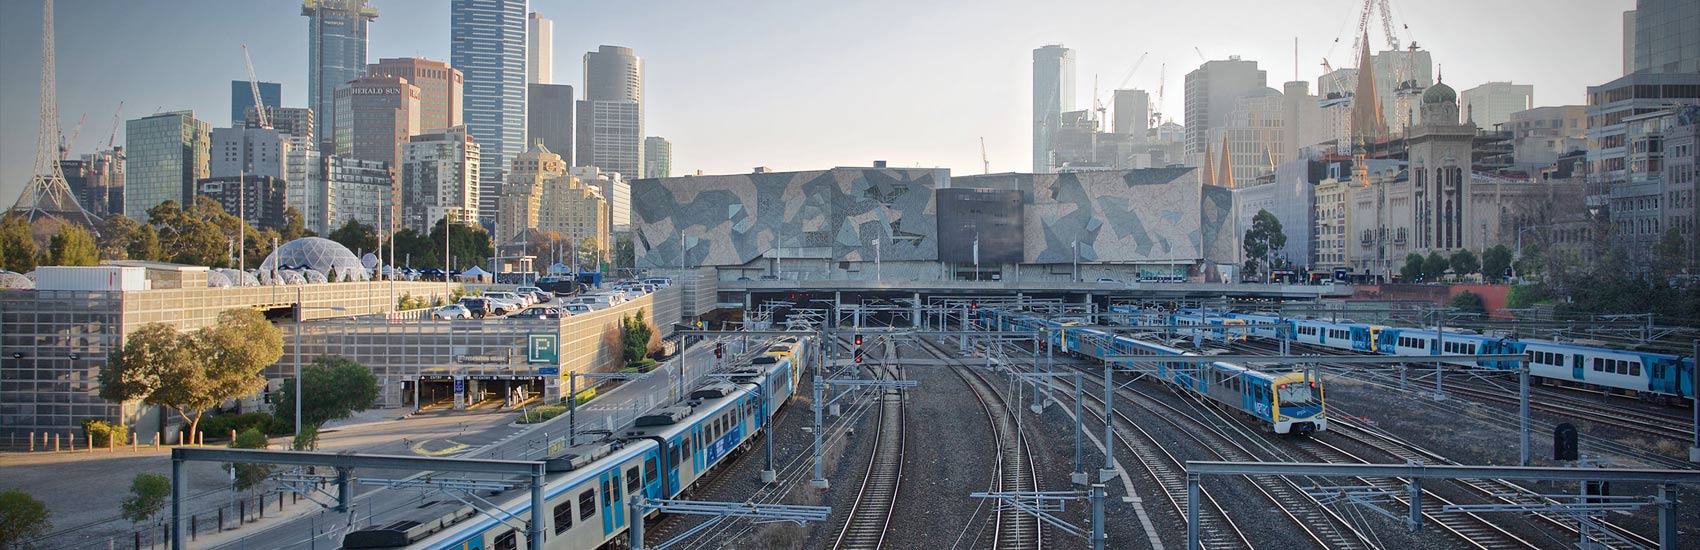 Flinders Station train tracks with Melbourne city skyline and buildings including Fed Square